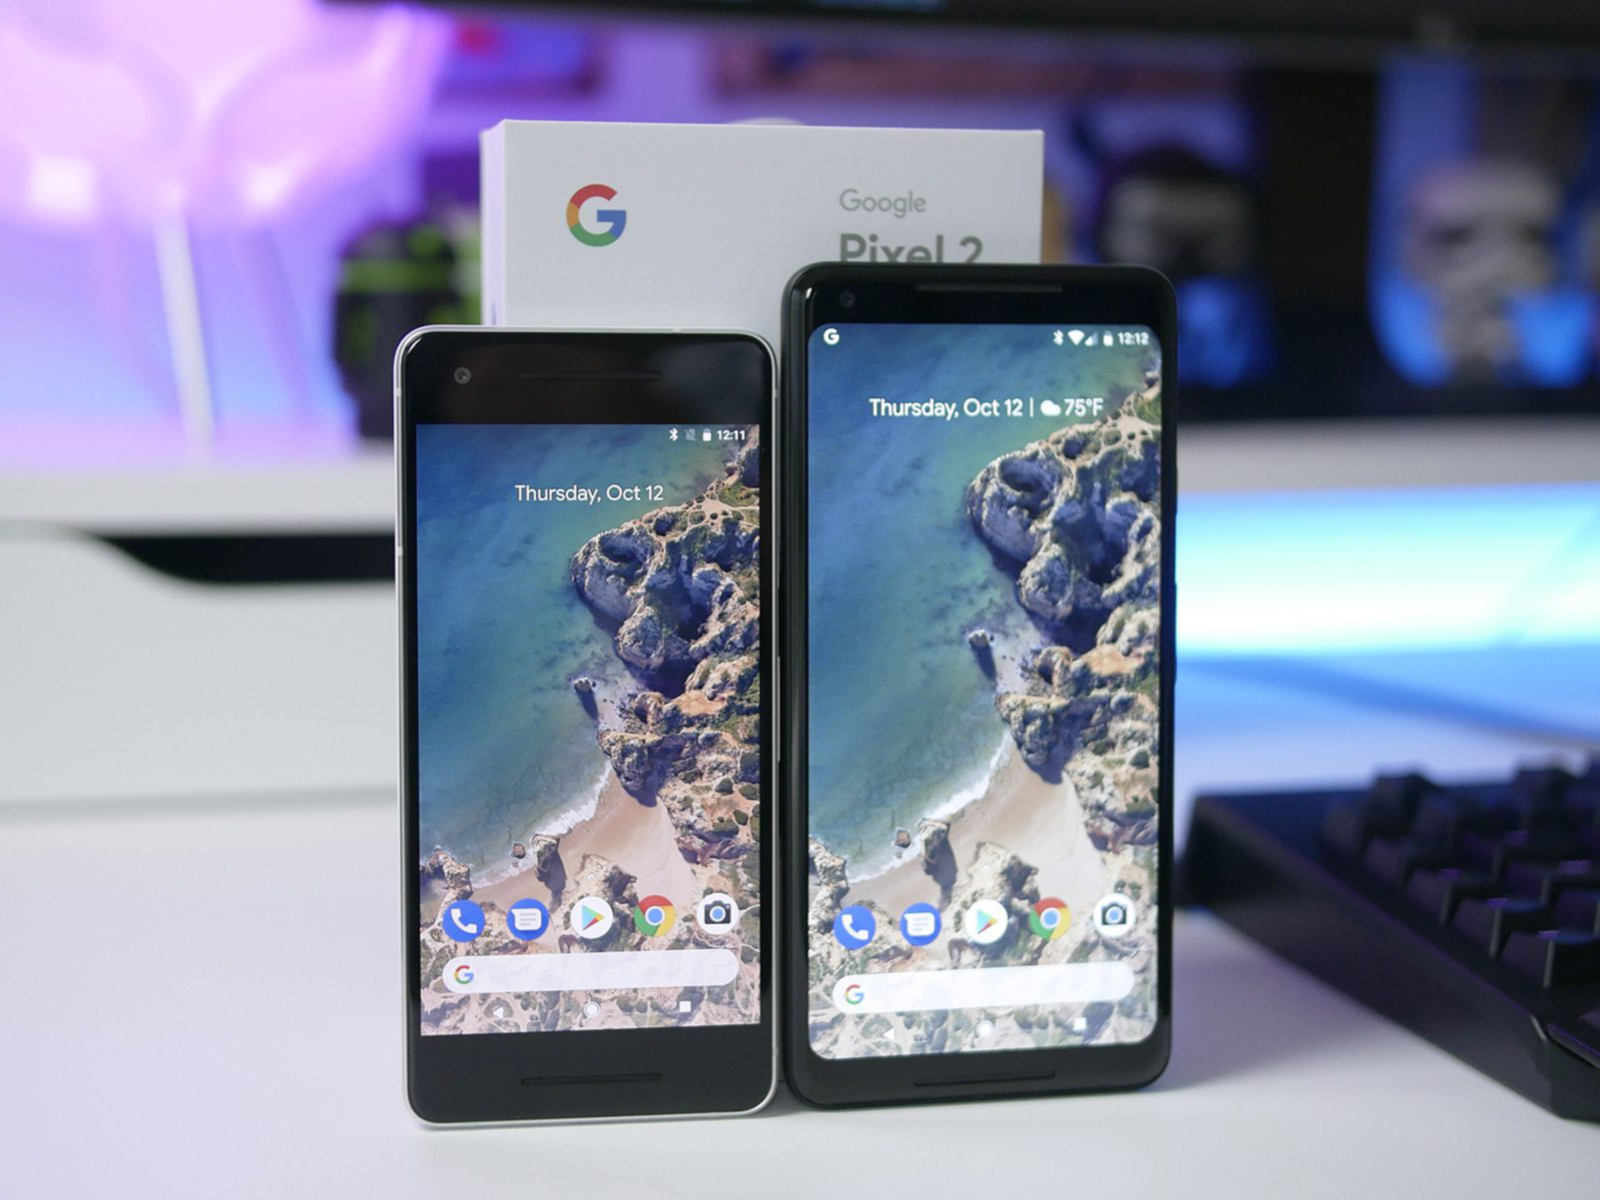 Guess how much the Pixel 2 / 2 XL is going for in Nigeria